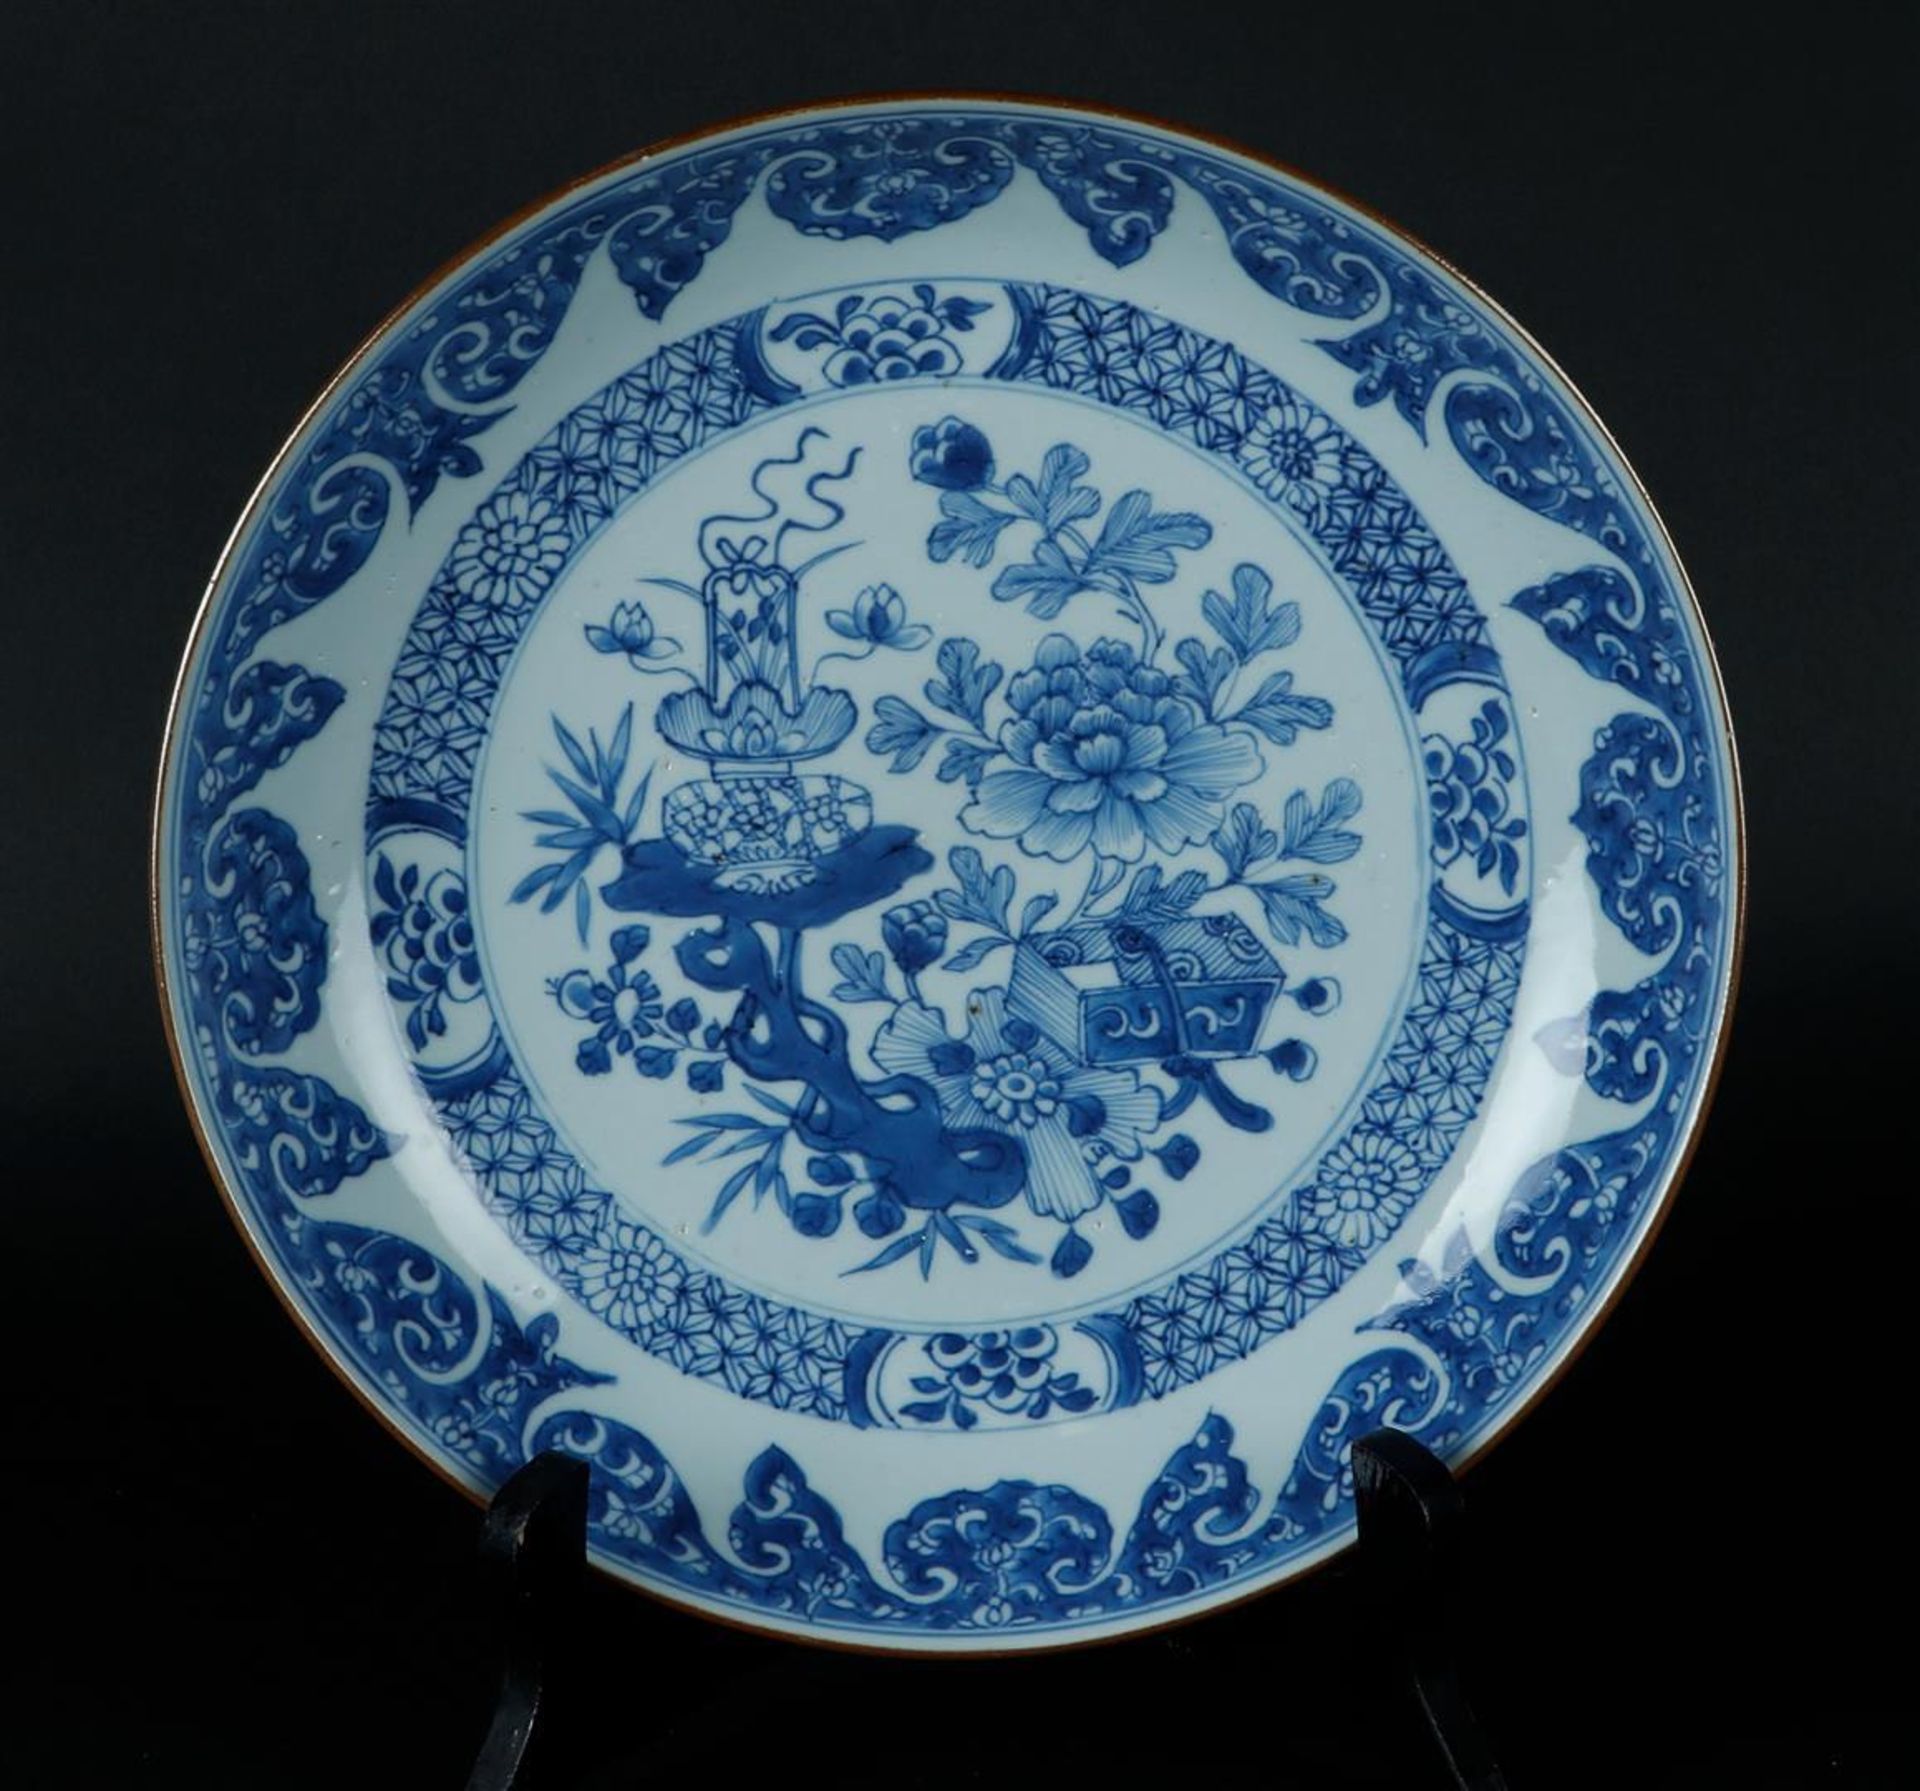 A porcelain deep dish with floral decor, with cachepot on a garden table decor. China, Yongzheng.